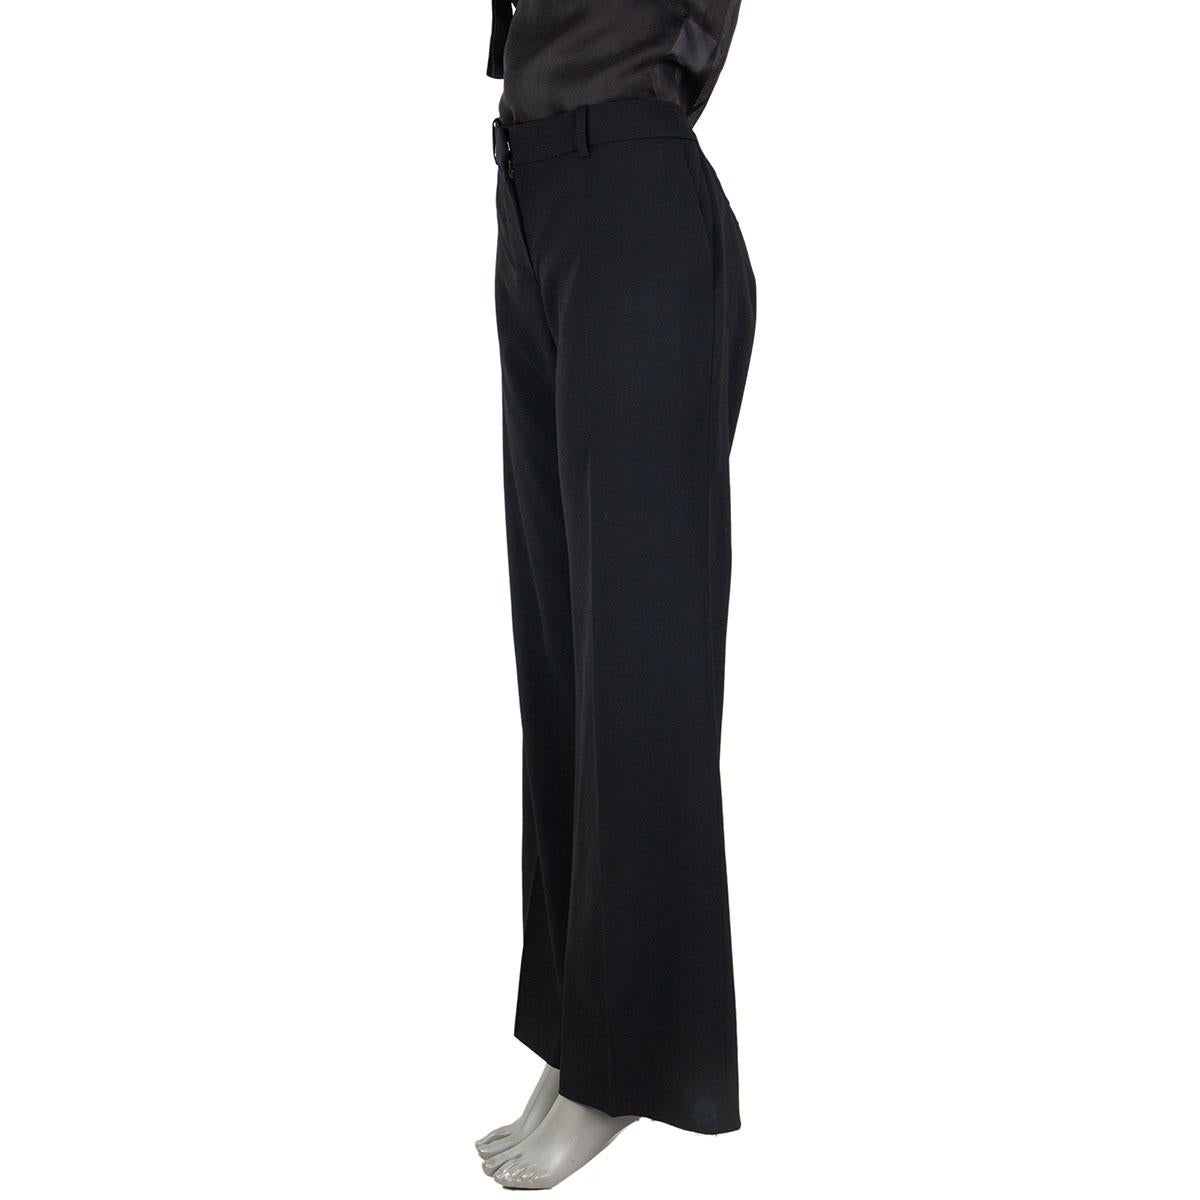 authentic Chloé wide leg suit pants in black wool (90%), polyamide (8%) and elastane (2%). Opens with a button, one hook and a zipper on the front. Has been worn and is in excellent conditions.

Tag Size 42 
Size L
Waist 90cm (35.1in)
Hips 104cm